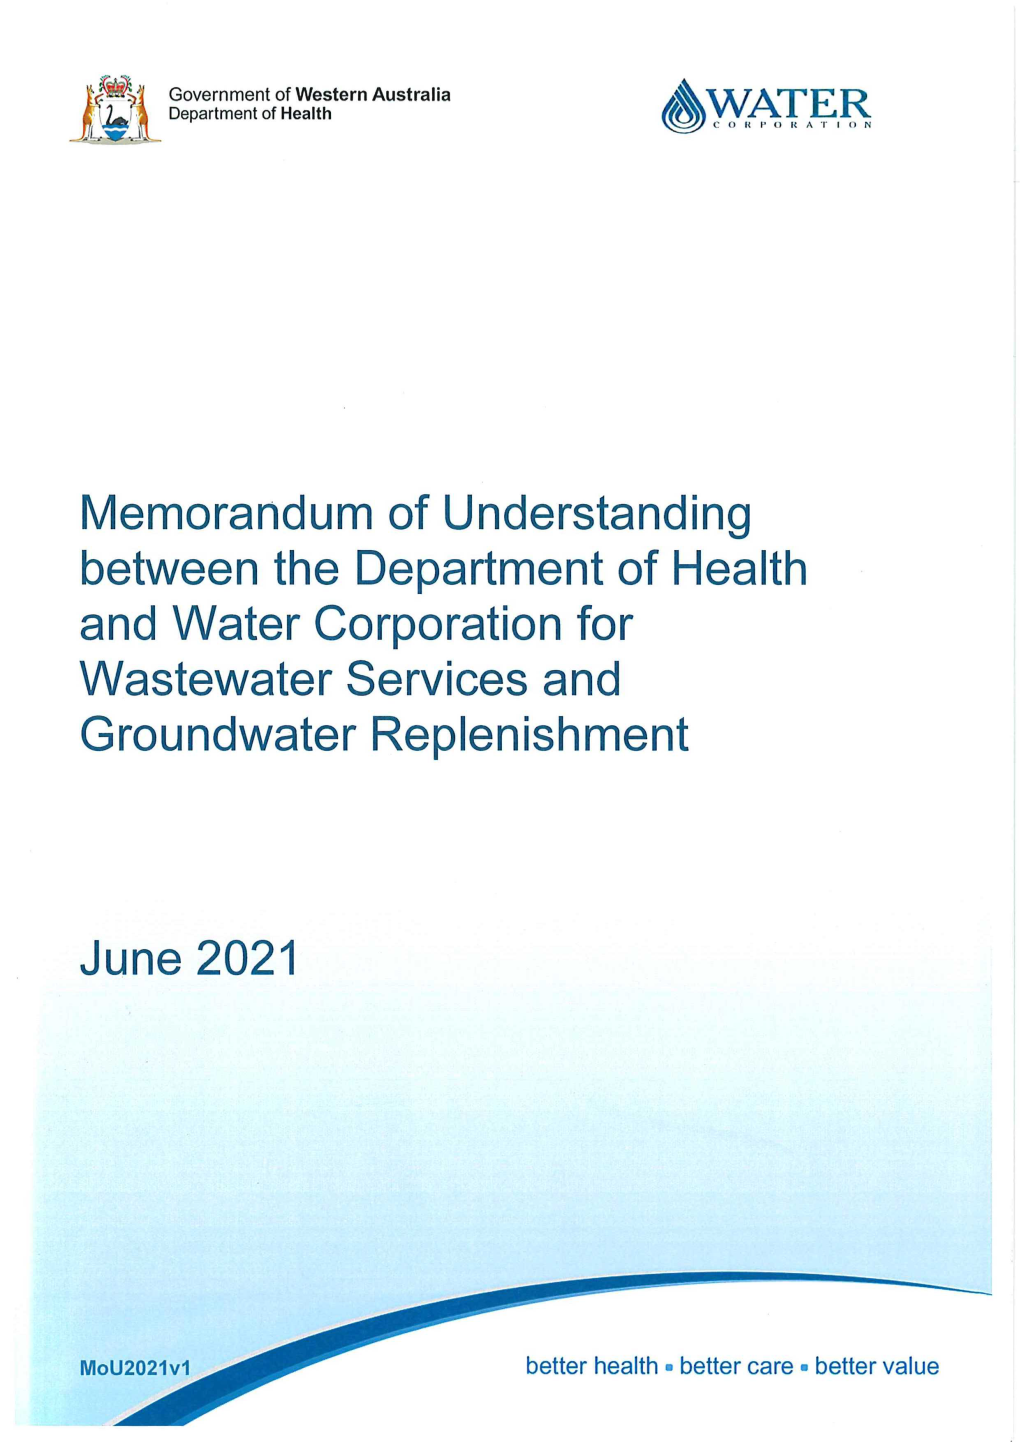 Memorandum of Understanding for Wastewater Services and Groundwater Replenishment Between the Department and the Corporation